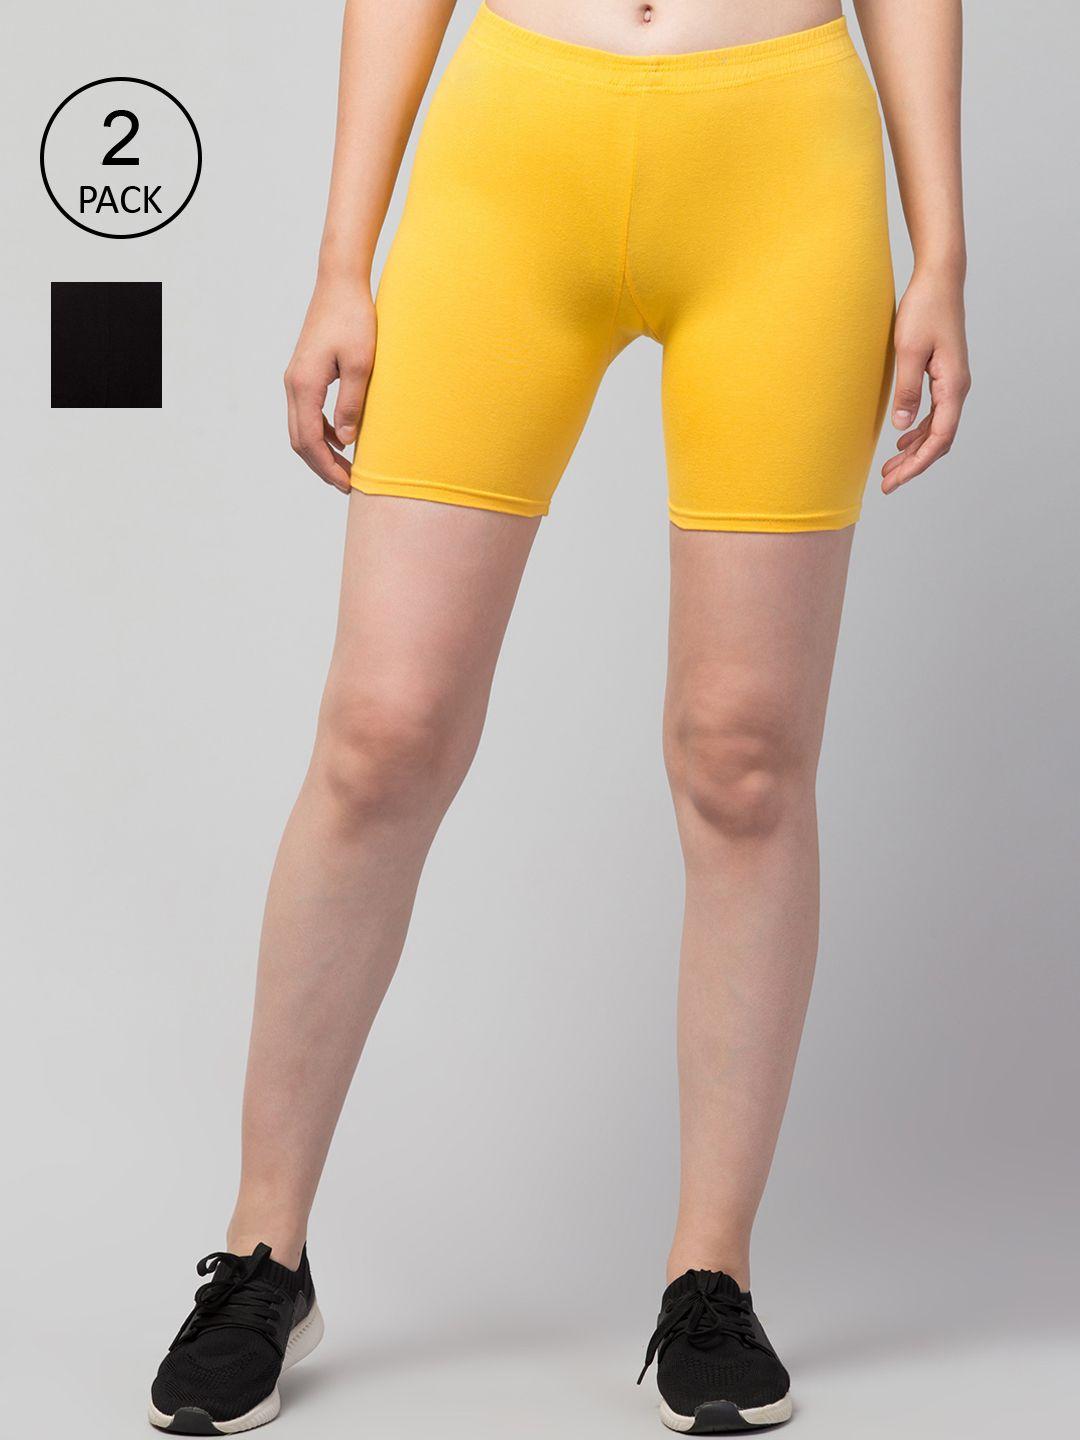 apraa & parma women pack of 2 yellow & black slim fit cycling cotton sports shorts